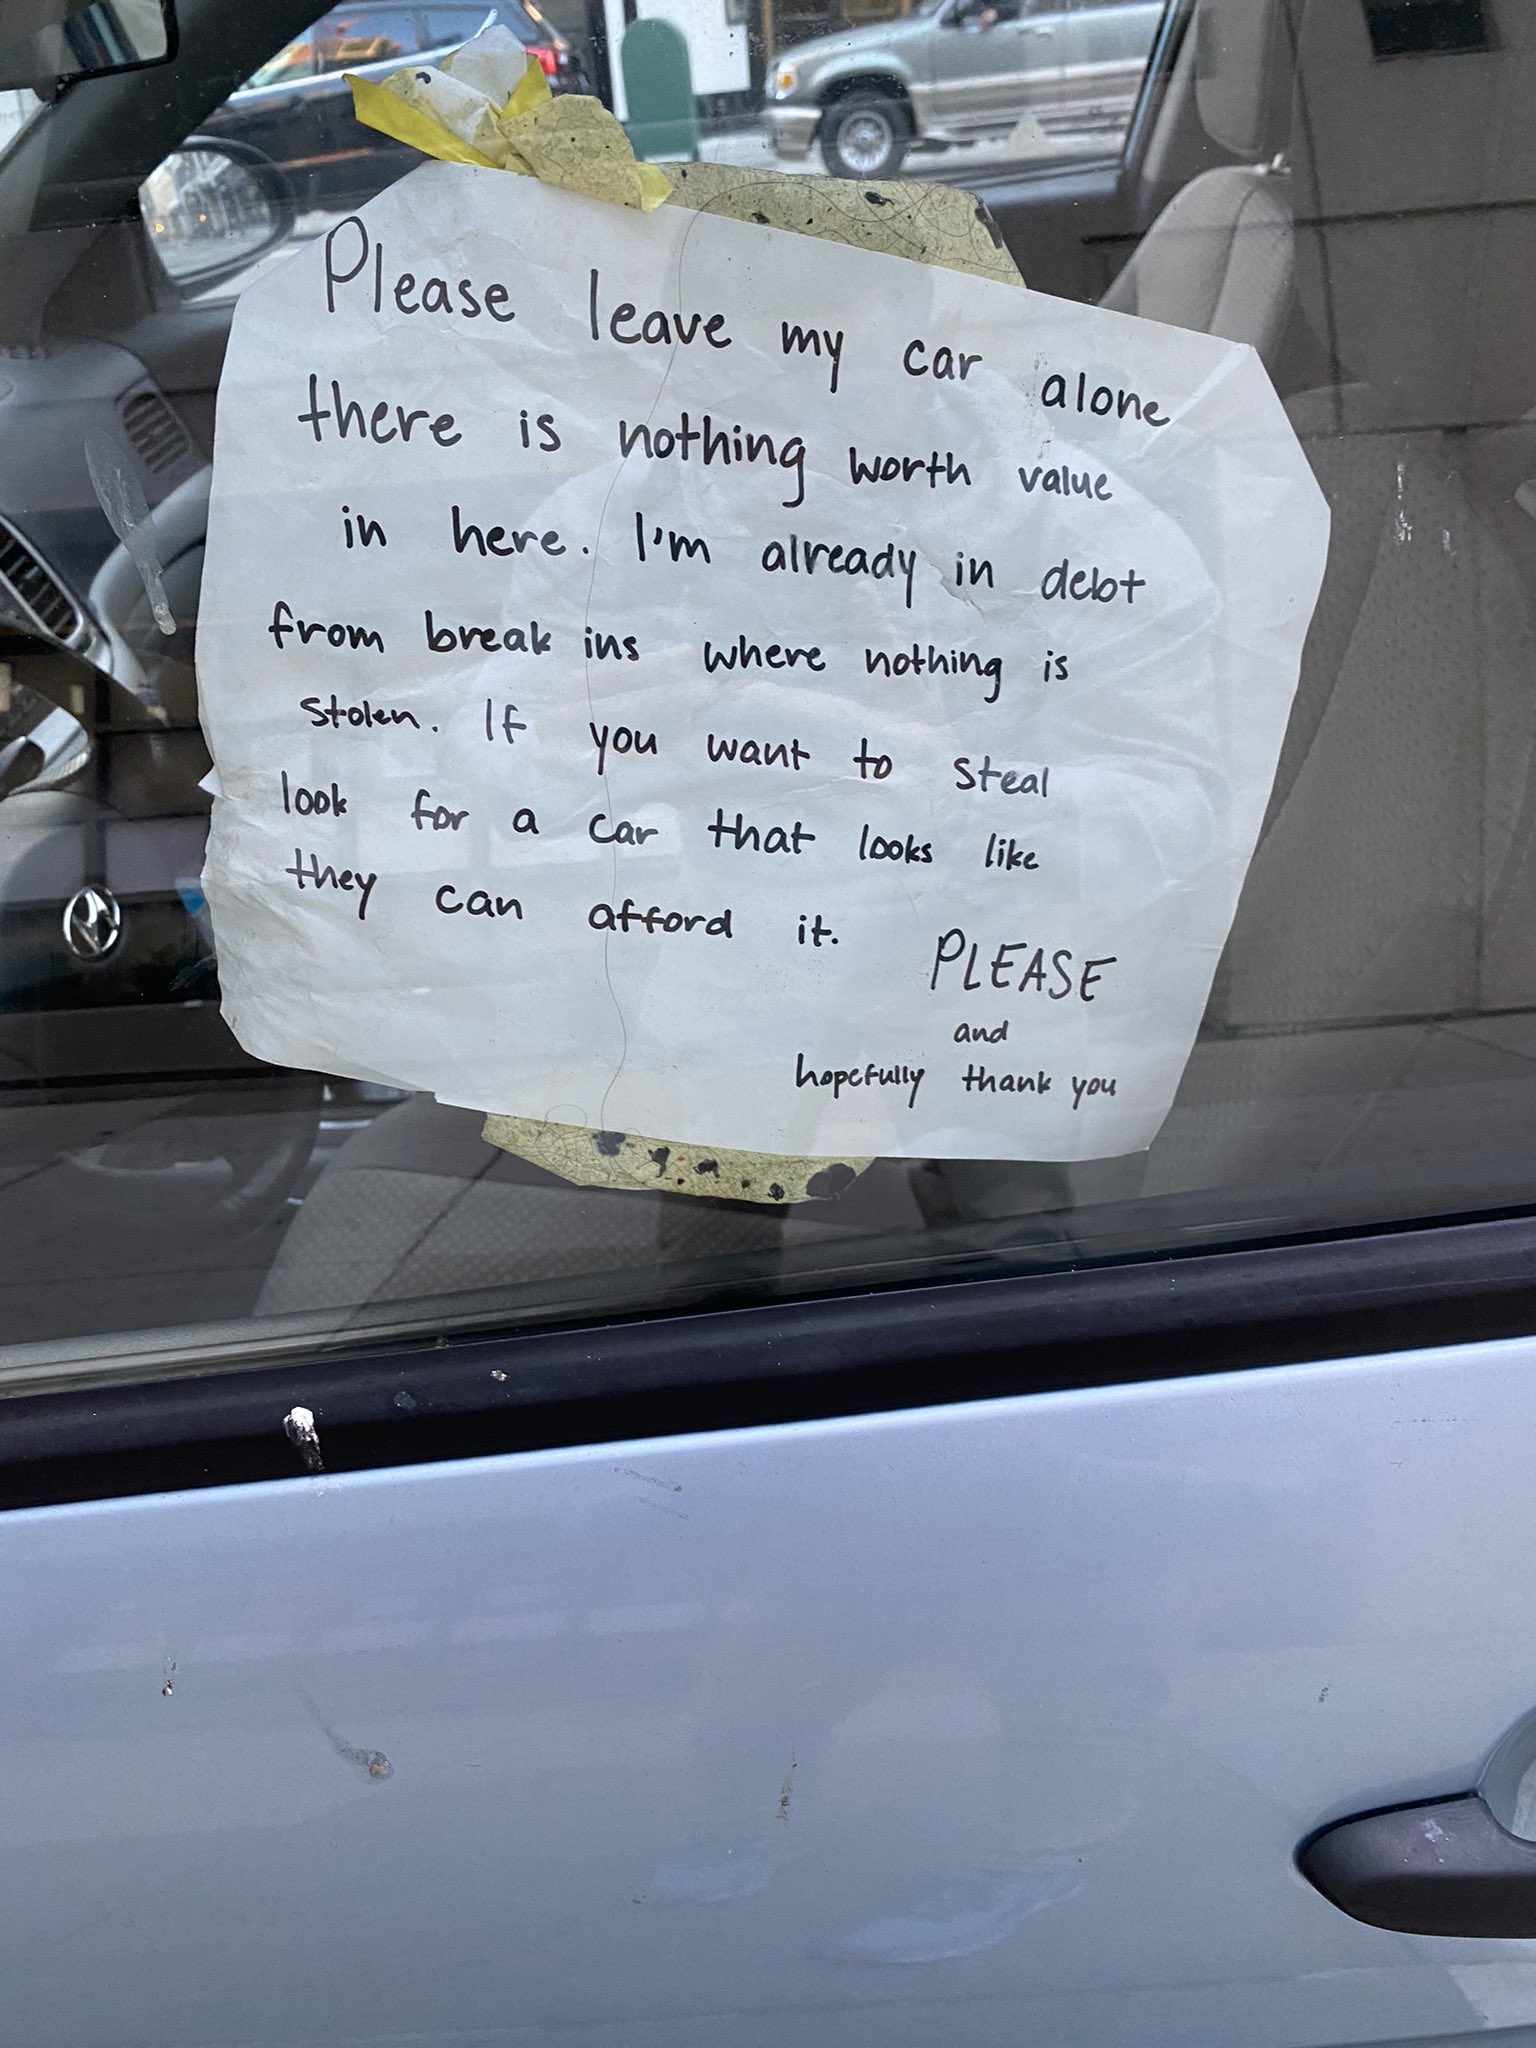 Message in a car parked in San Francisco